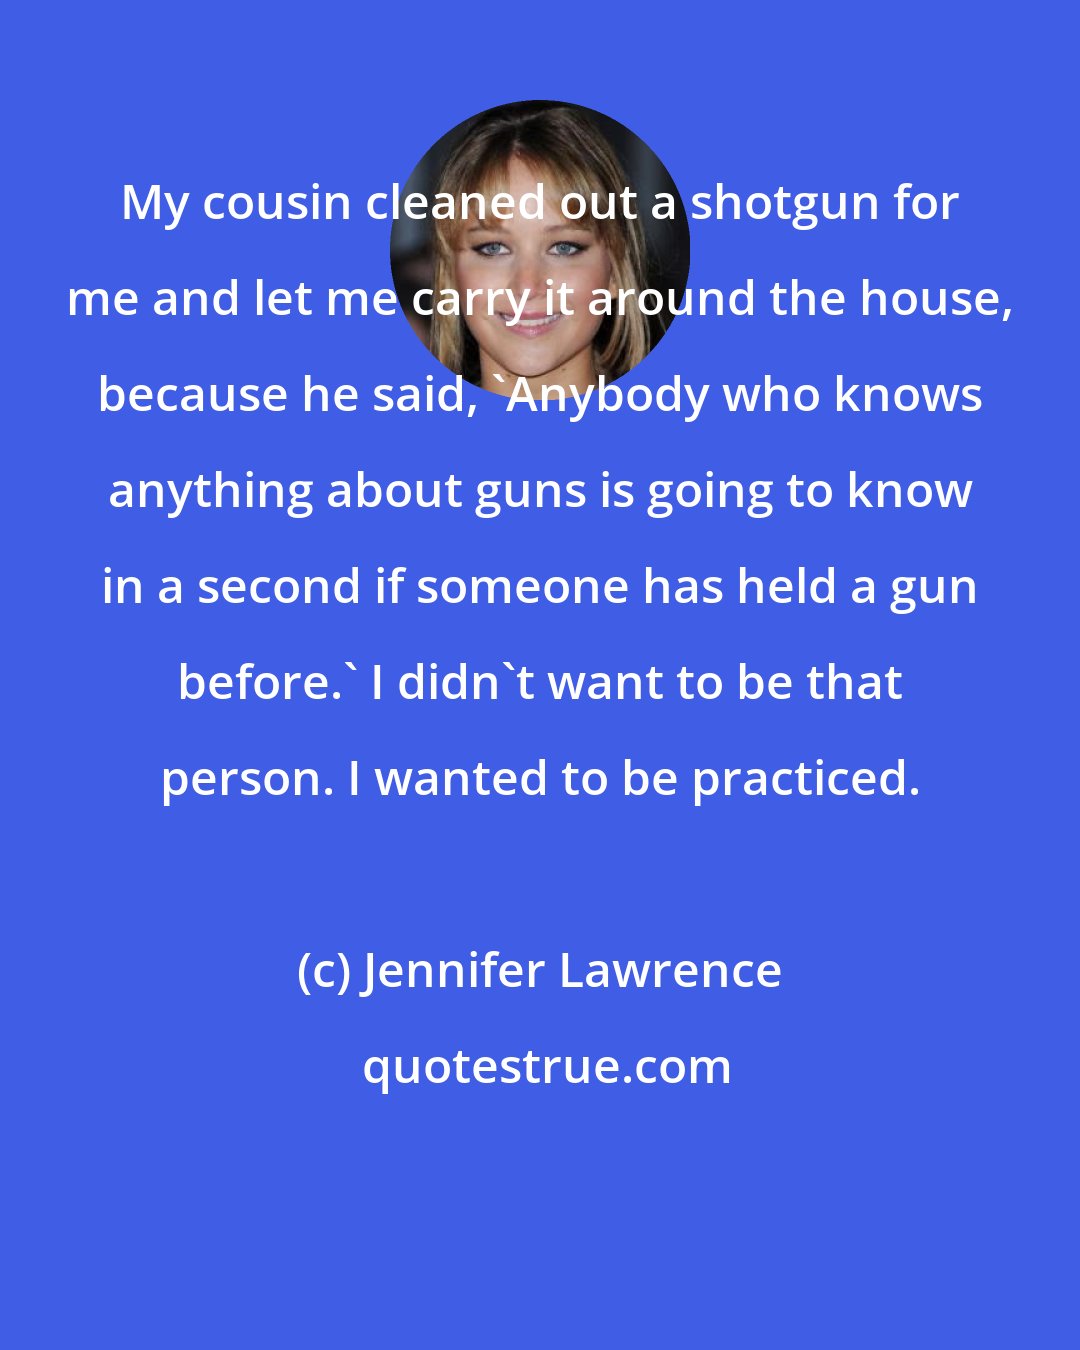 Jennifer Lawrence: My cousin cleaned out a shotgun for me and let me carry it around the house, because he said, 'Anybody who knows anything about guns is going to know in a second if someone has held a gun before.' I didn't want to be that person. I wanted to be practiced.